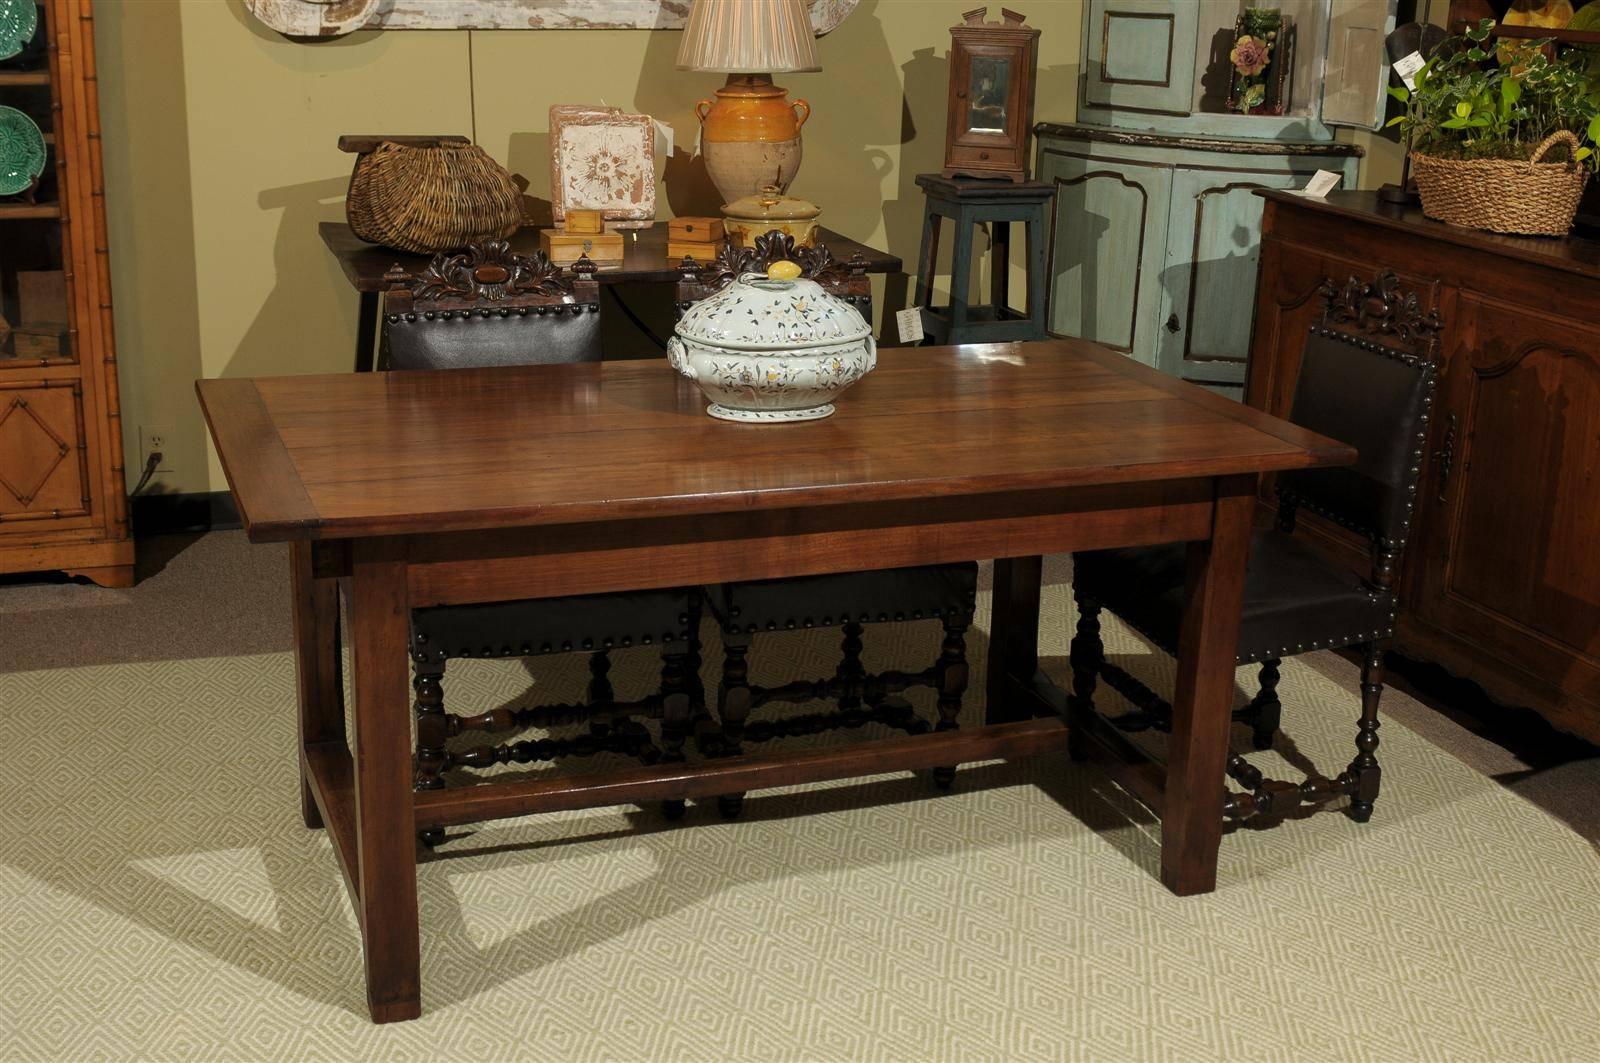 Hand-Crafted 19th Century French Farm Table